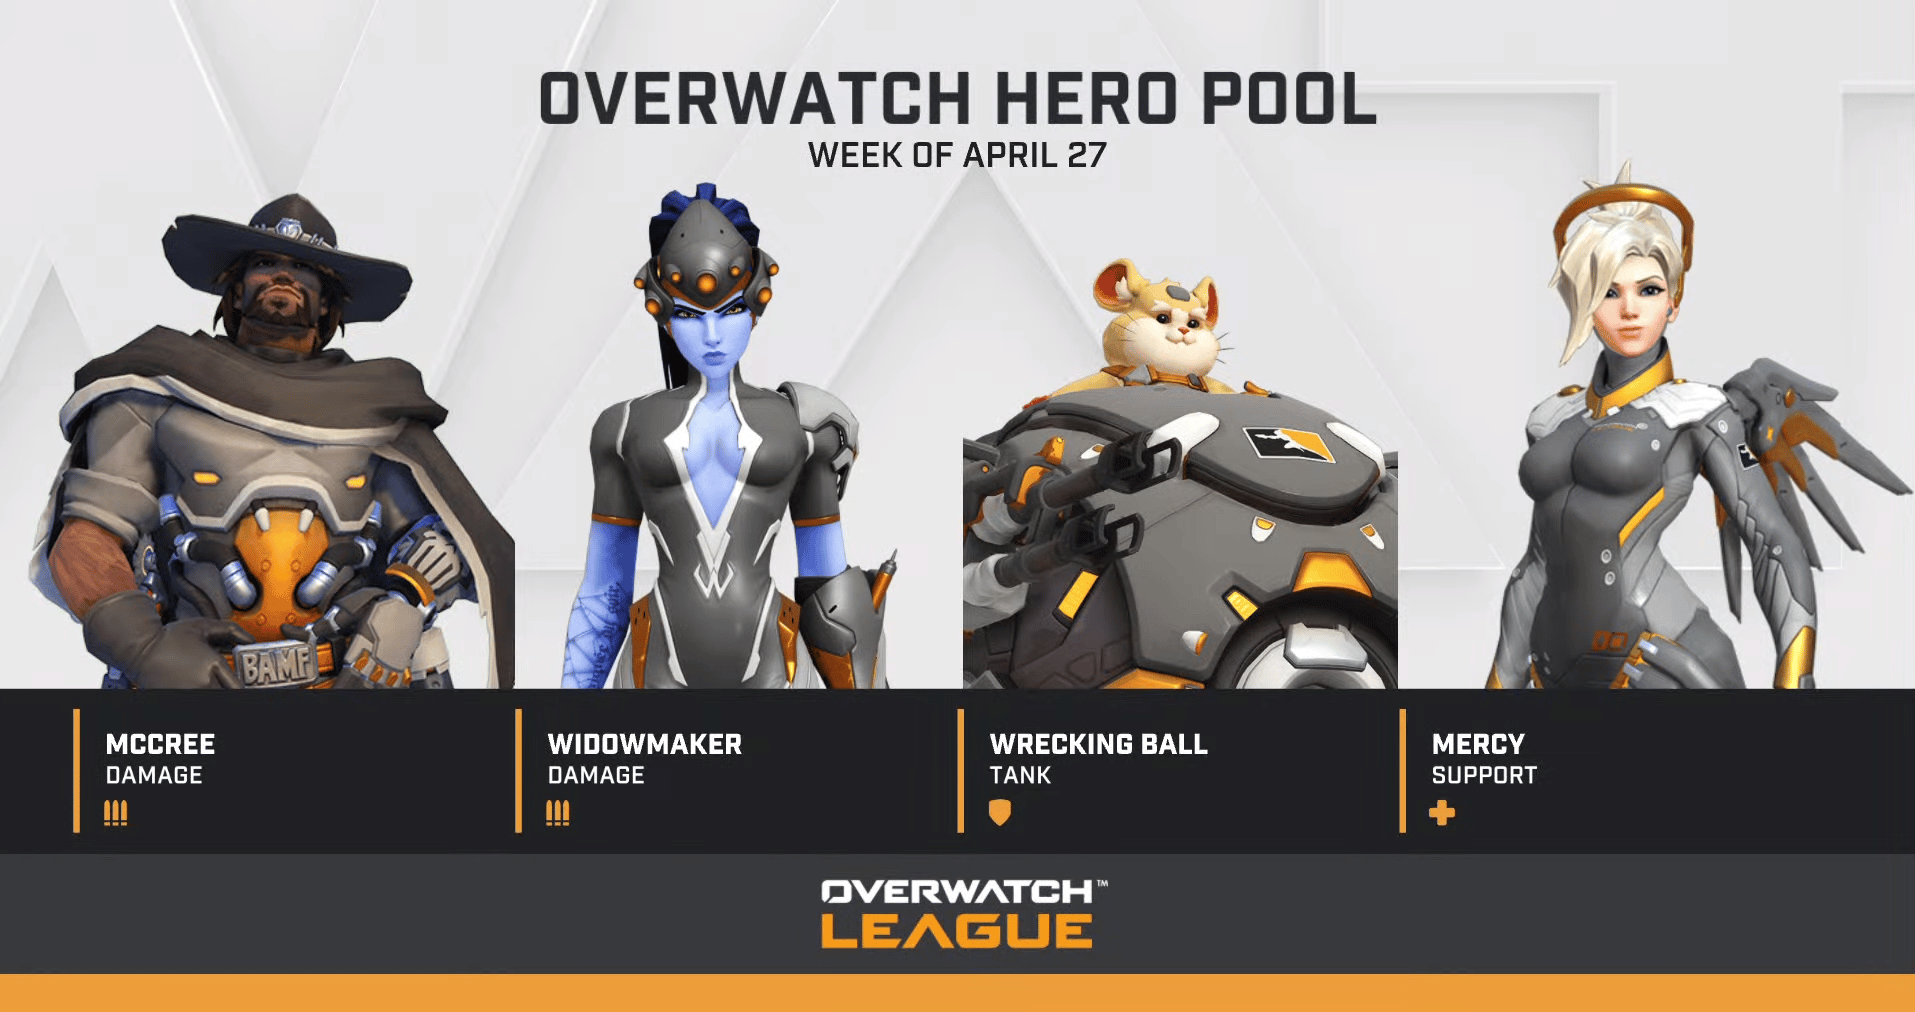 Overwatch April 27 hero pool bans McCree, Widowmaker, Wrecking Ball, and Mercy